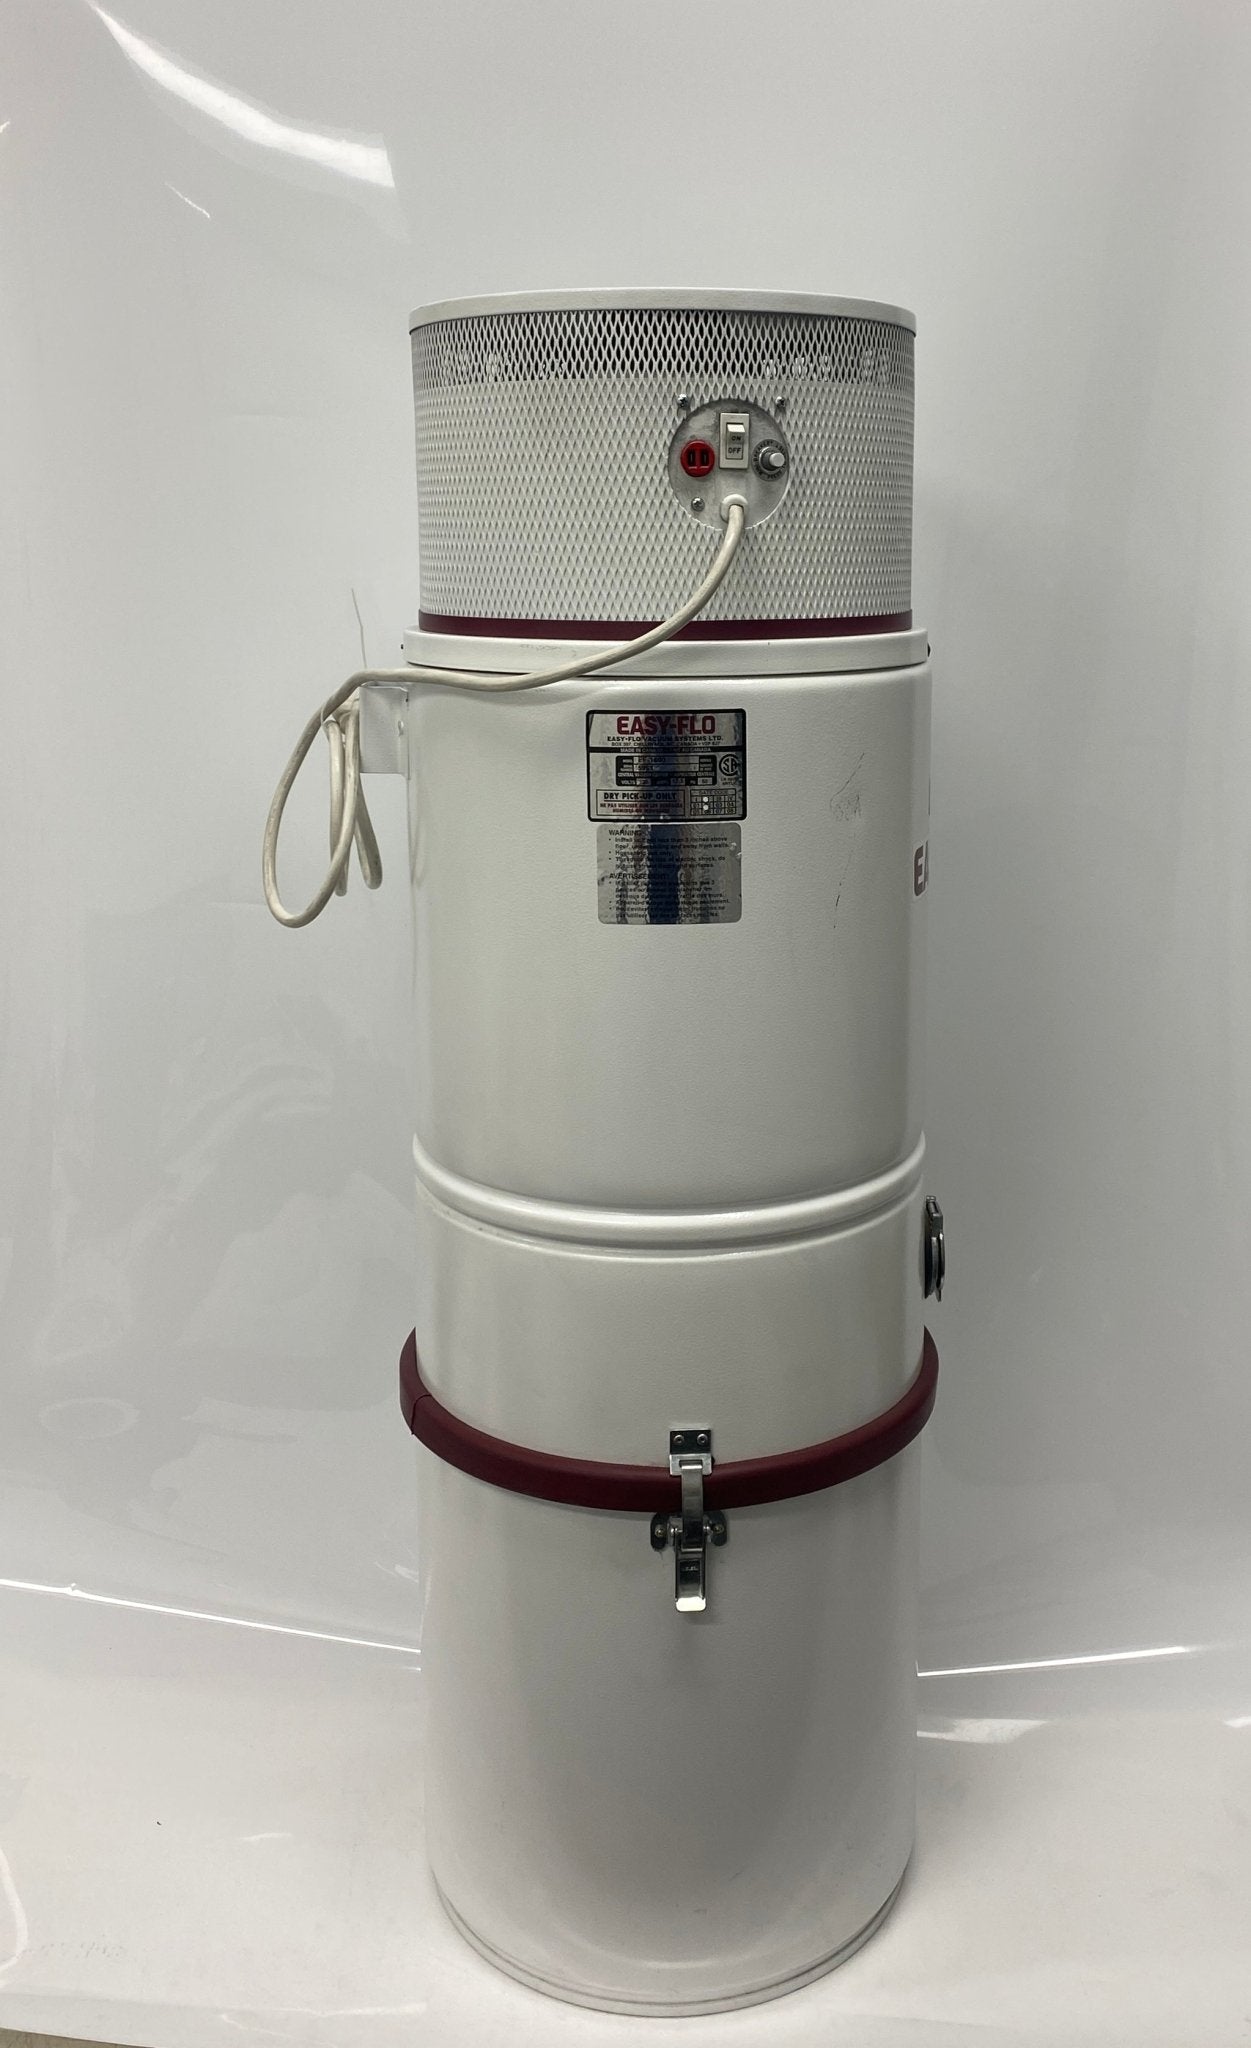 Efficient and Quiet Easy-Flo EF1600 Central Vacuum System with Self-Cleaning Filtration